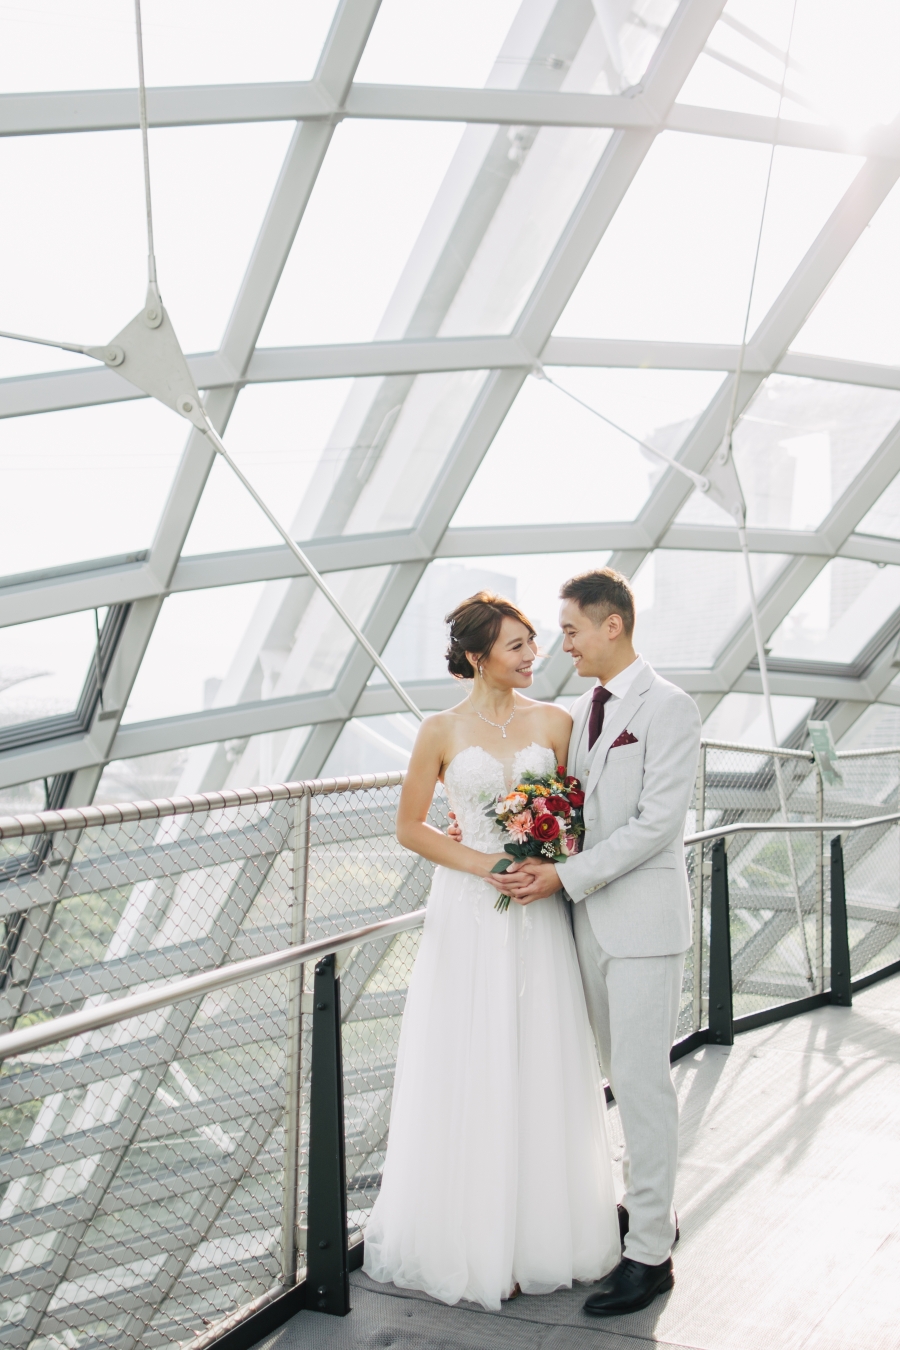 Singapore Pre-Wedding Photoshoot At Gardens By The Bay - Cloud Forest And Night Shoot At Marina Bay Sands by Cheng on OneThreeOneFour 12